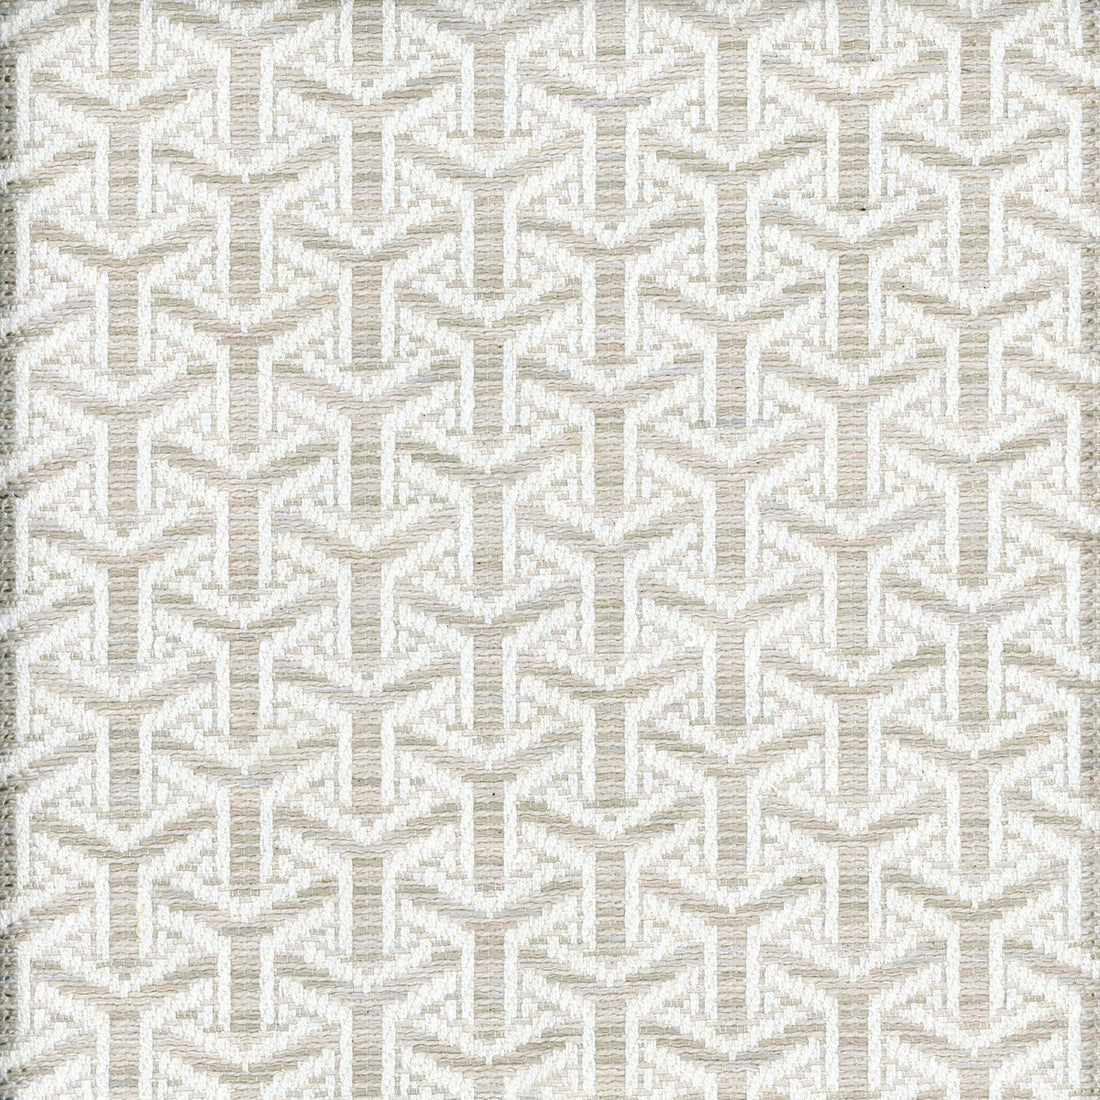 Monte fabric in string color - pattern AM100343.116.0 - by Kravet Couture in the Andrew Martin Salento collection